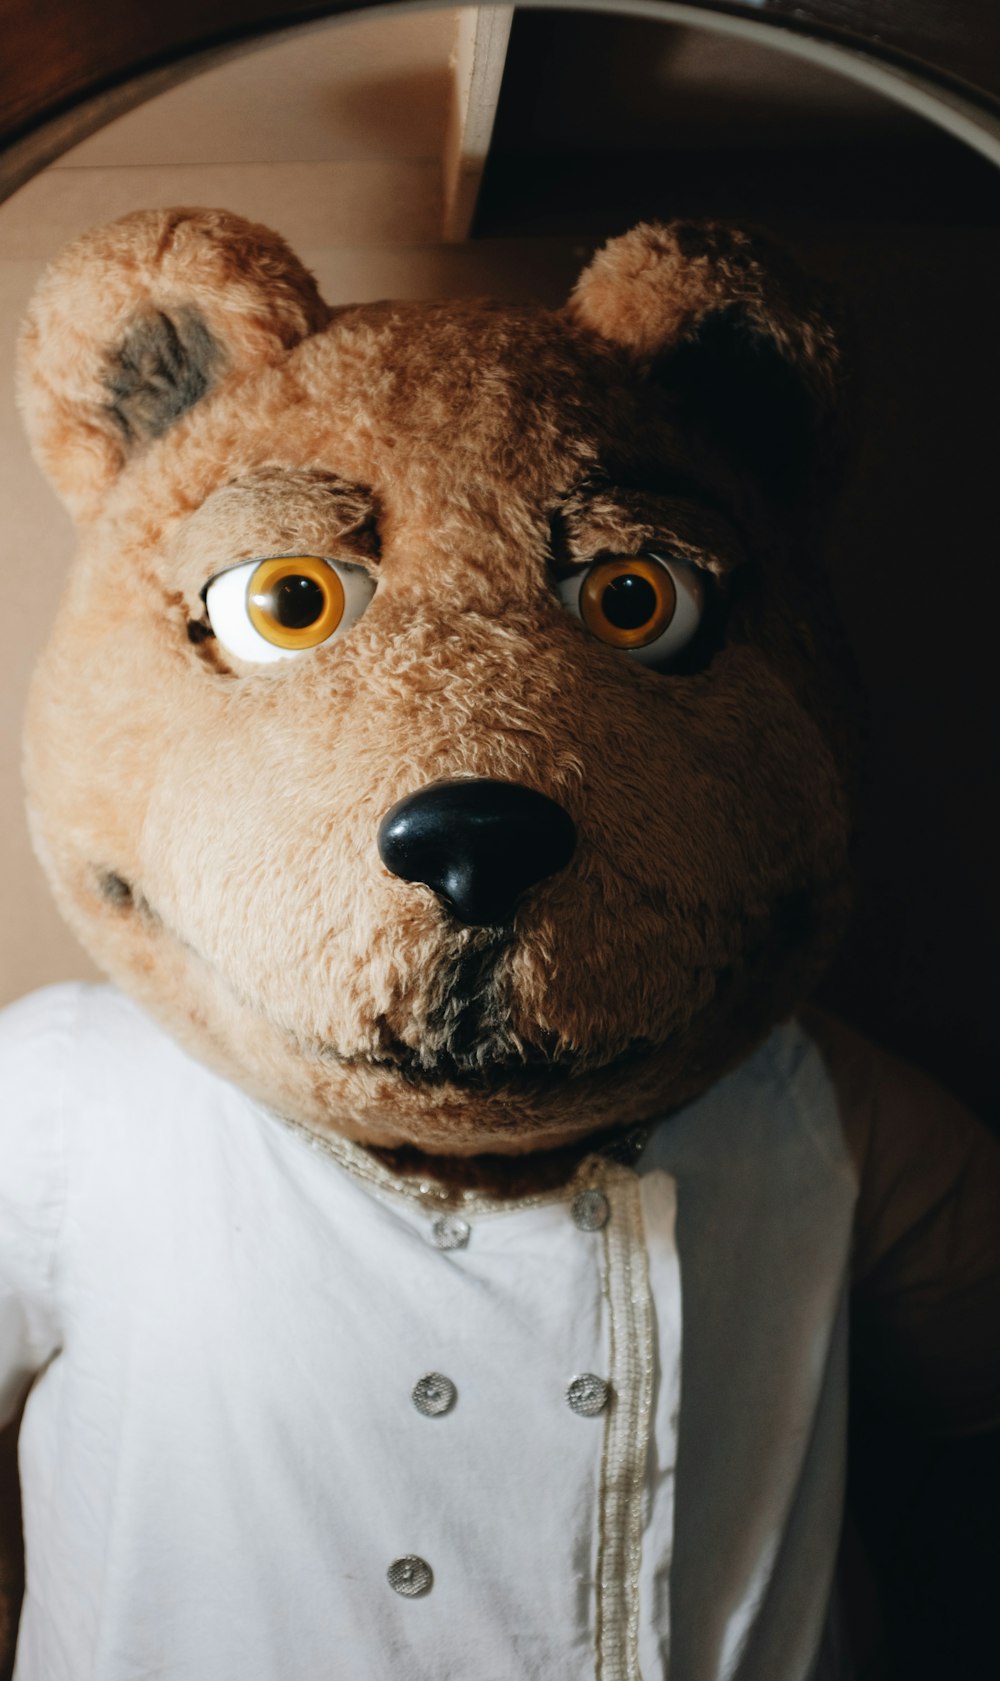 a teddy bear dressed in a chef's outfit